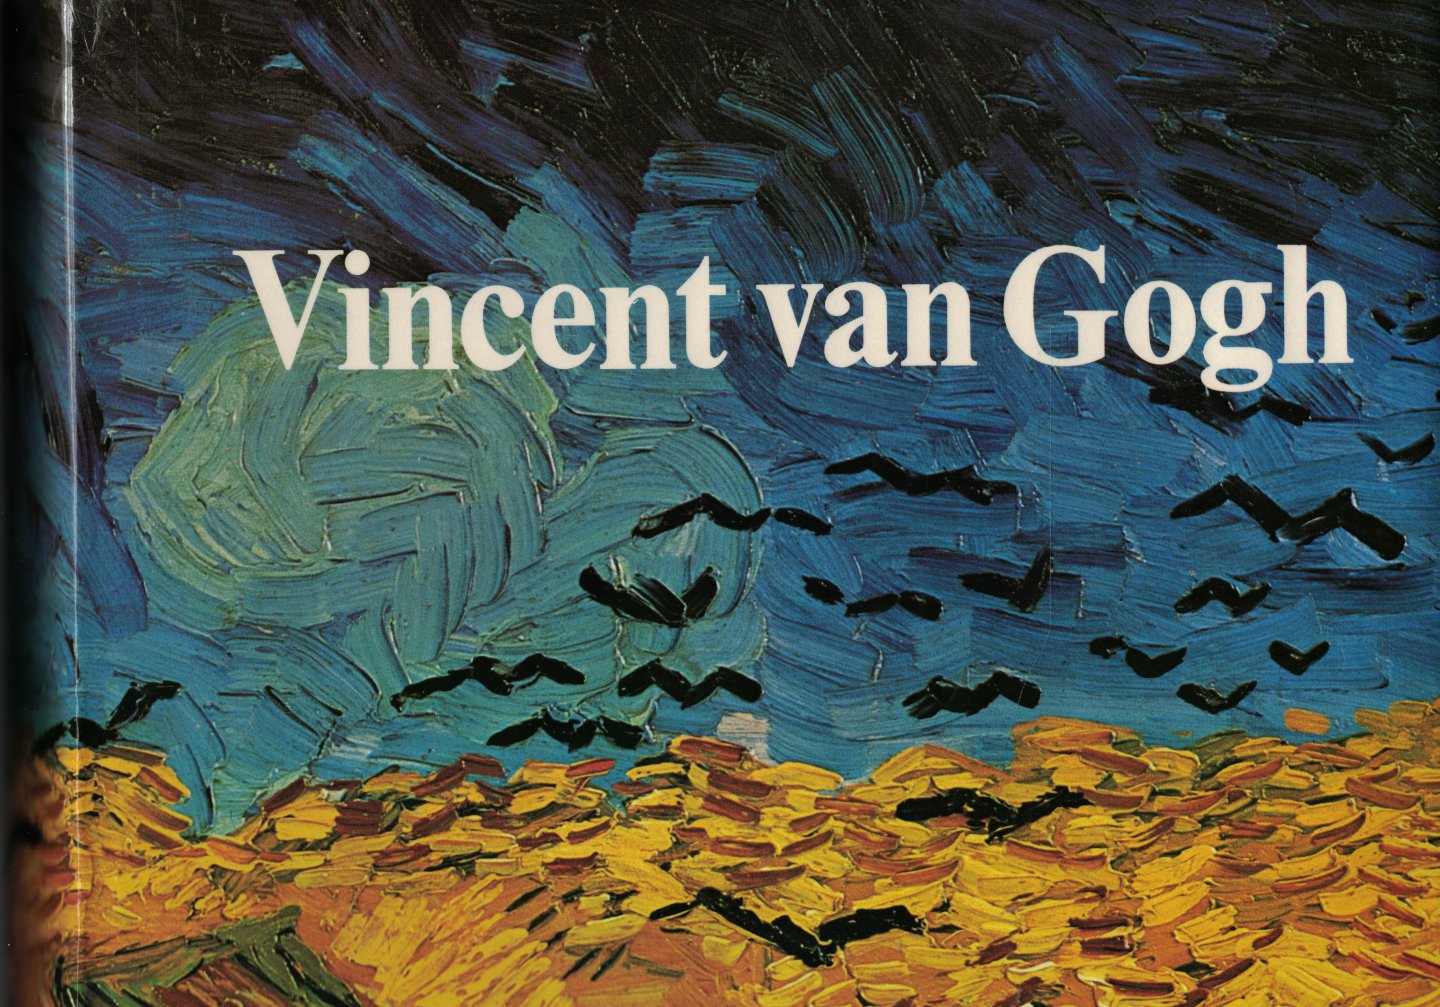 Faille, J.B. de la - The Works of Vincent van Gogh - His paintings and drawings (zie scan 2)